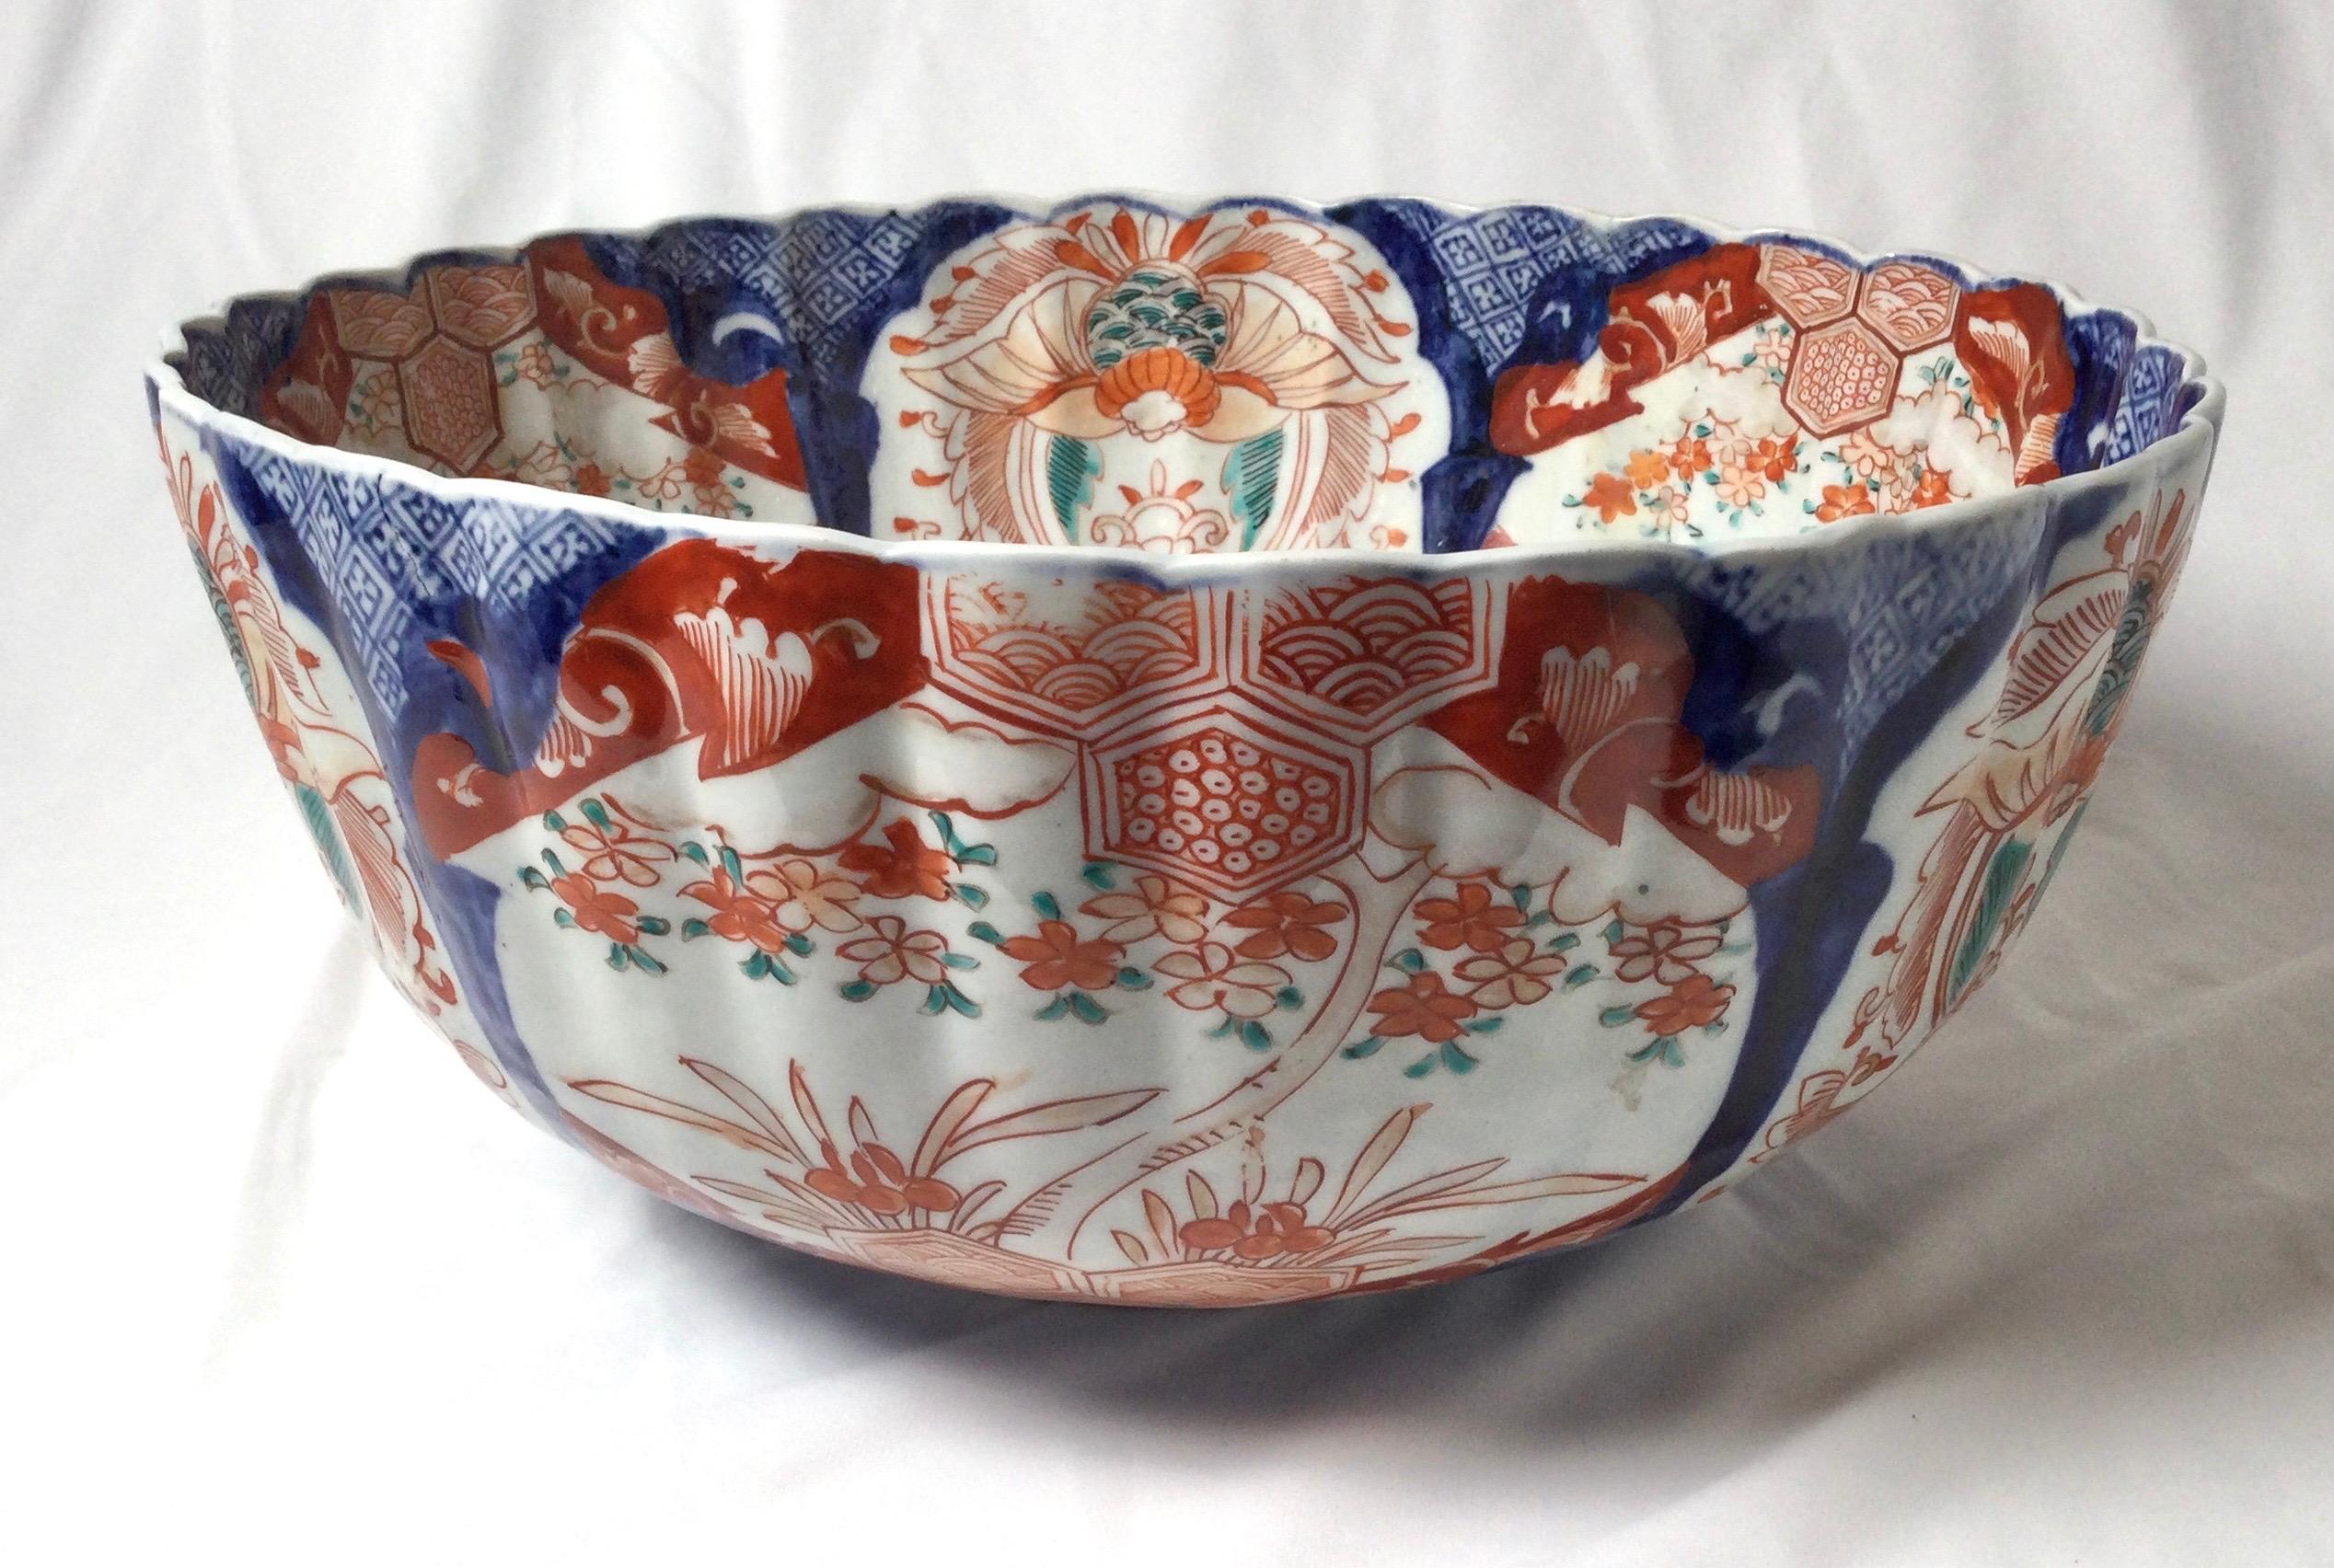 Classic cobalt blue and iron red Imari scalloped bowl with scalloped rim. The white porcelain with Japanese hand painted decoration with green accents. Measure: Large 13.5 inches in diameter.